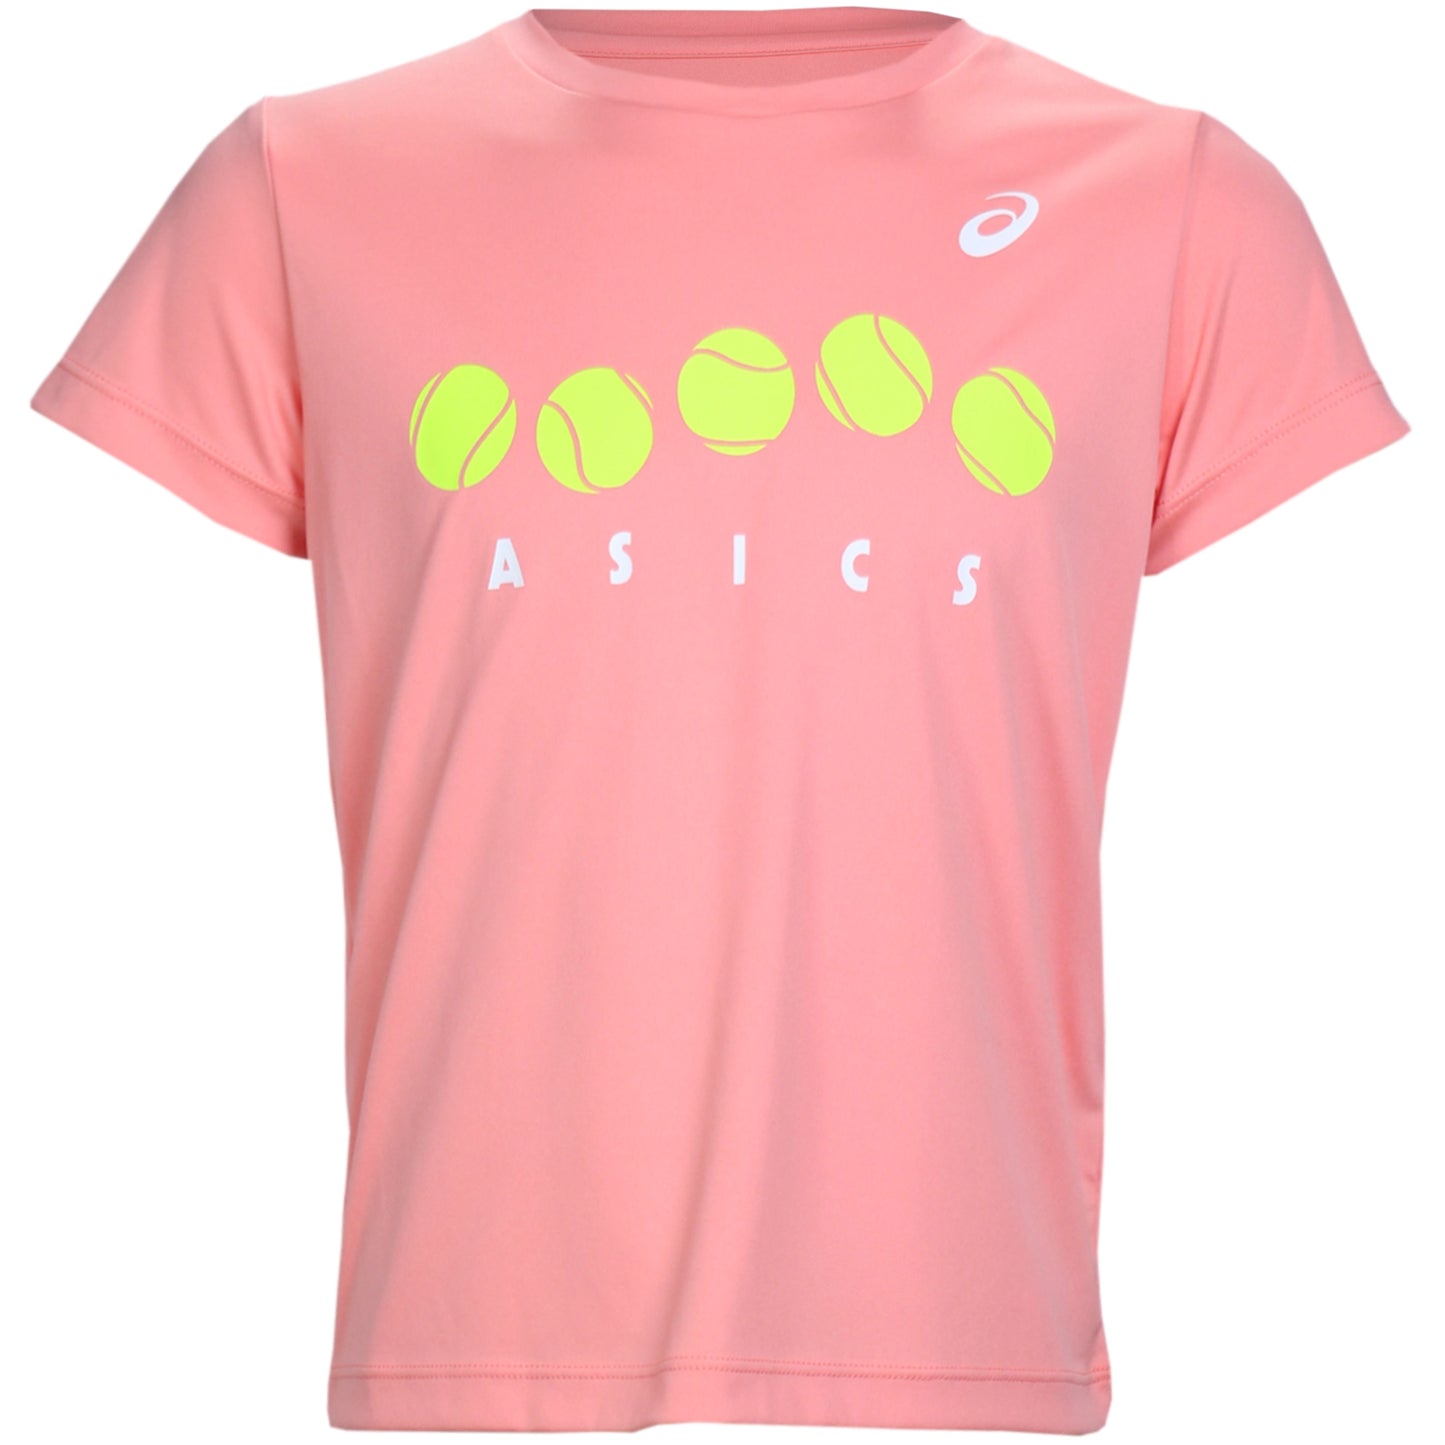 Asics Girl's Tennis Graphic Tee 2044A038-700